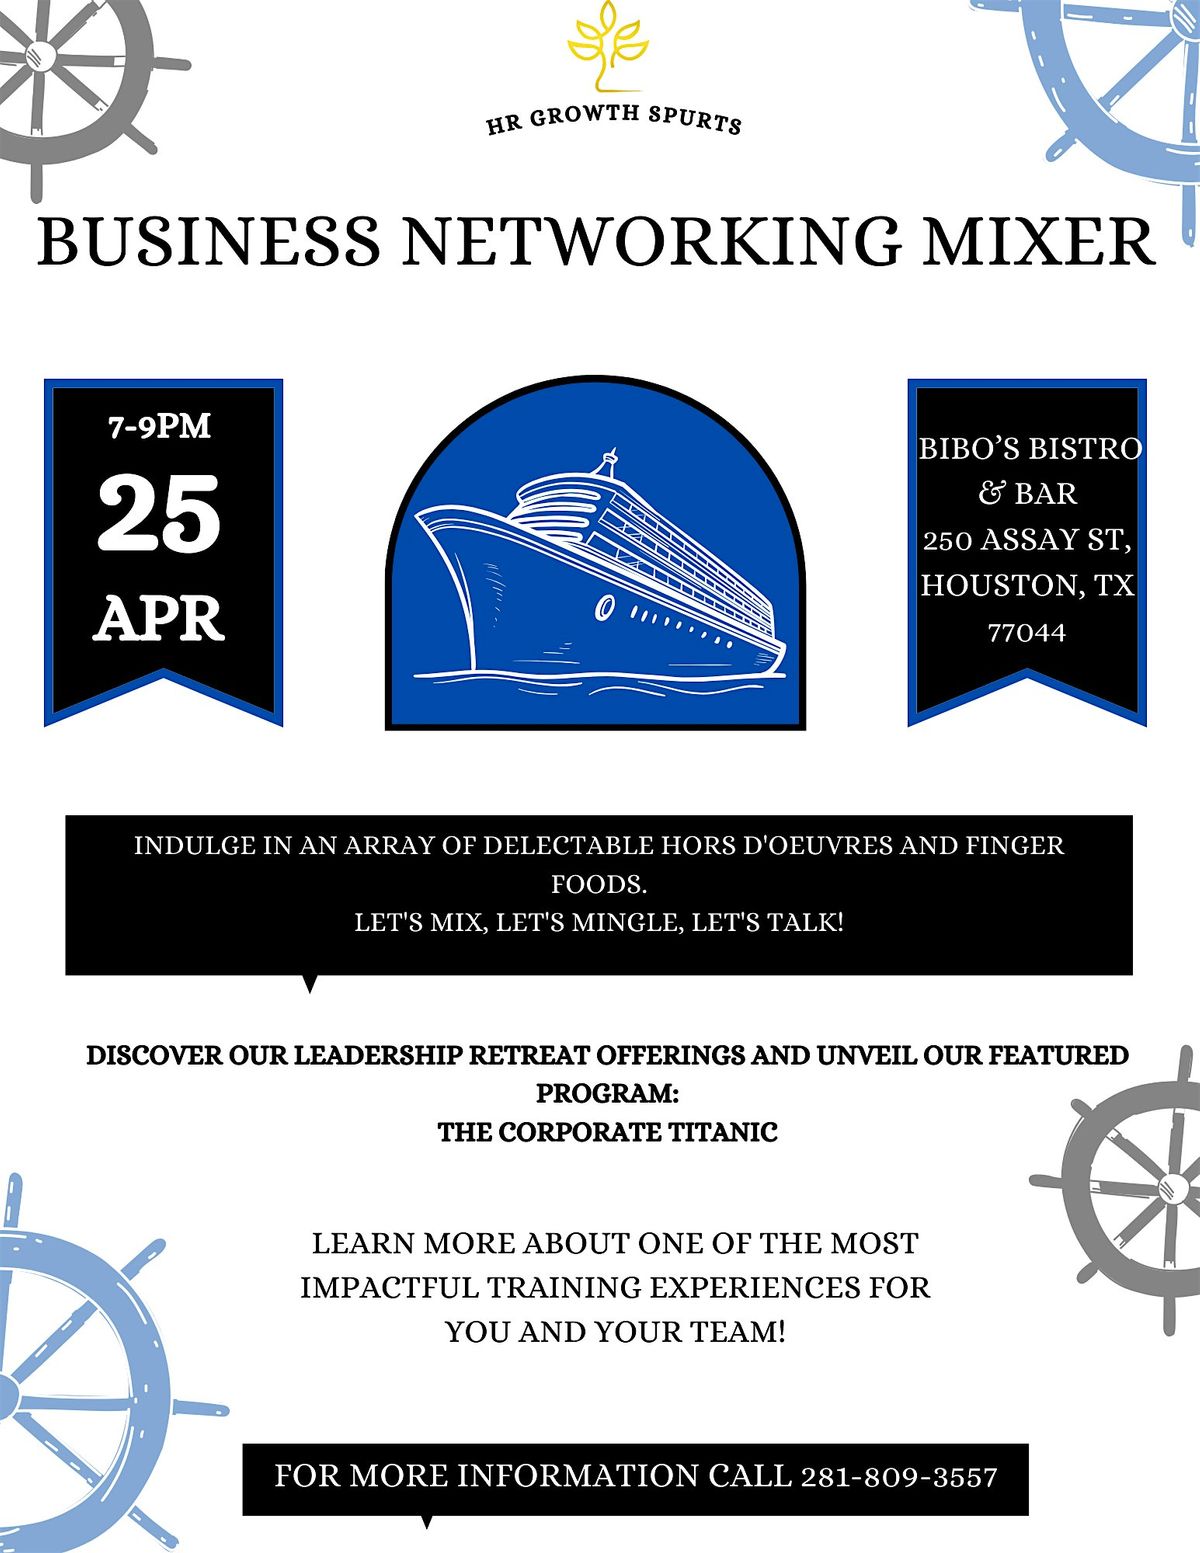 Join Us for a Business Networking Mixer